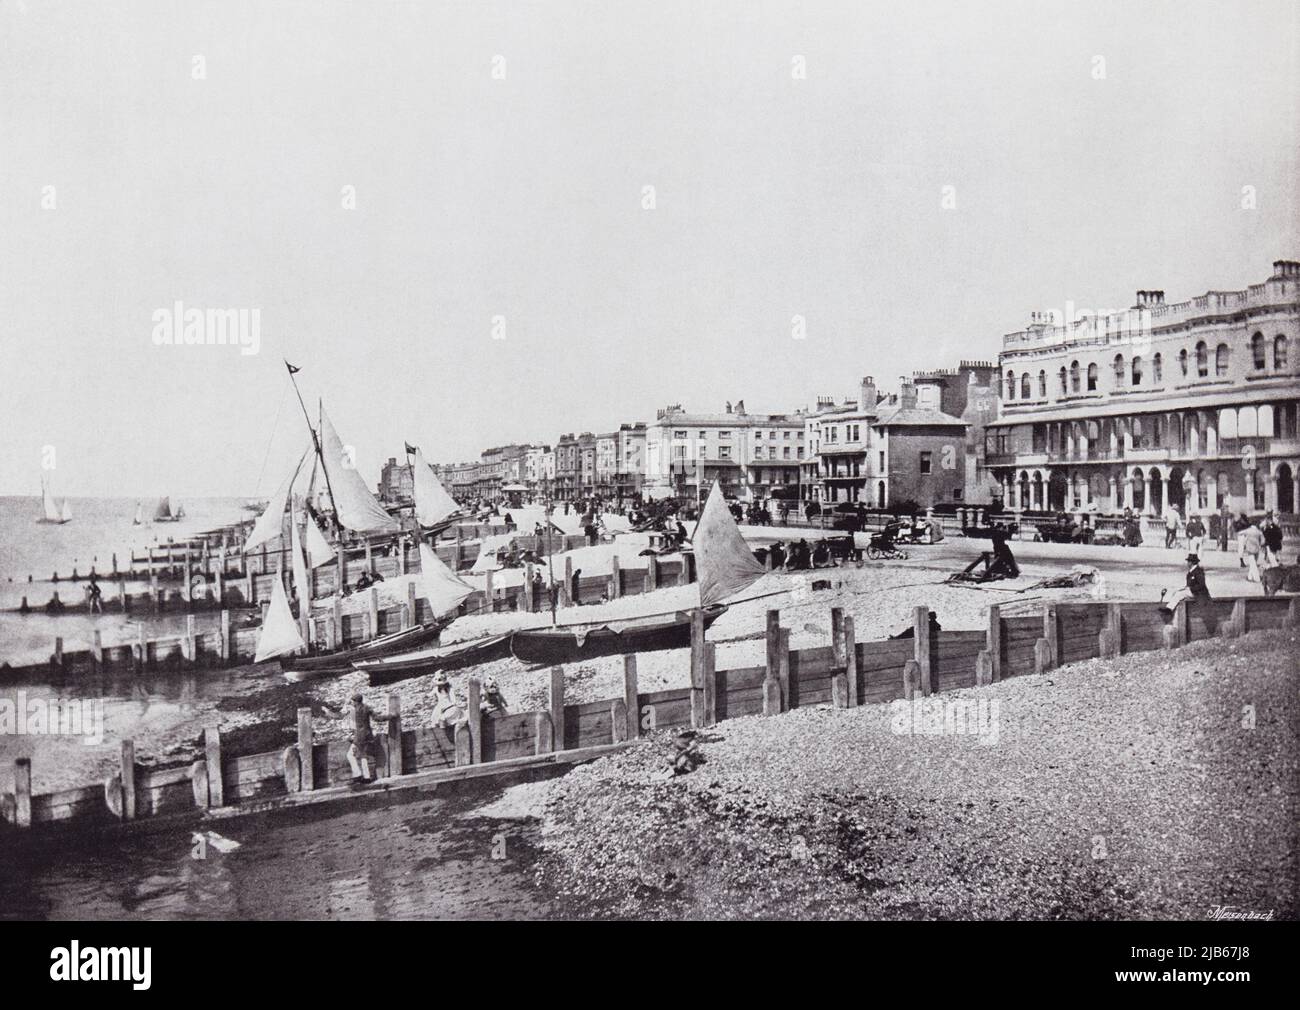 Worthing, West Sussex, England, seen here in the 19th century. From Around The Coast, An Album of Pictures from Photographs of the Chief Seaside Stock Photo